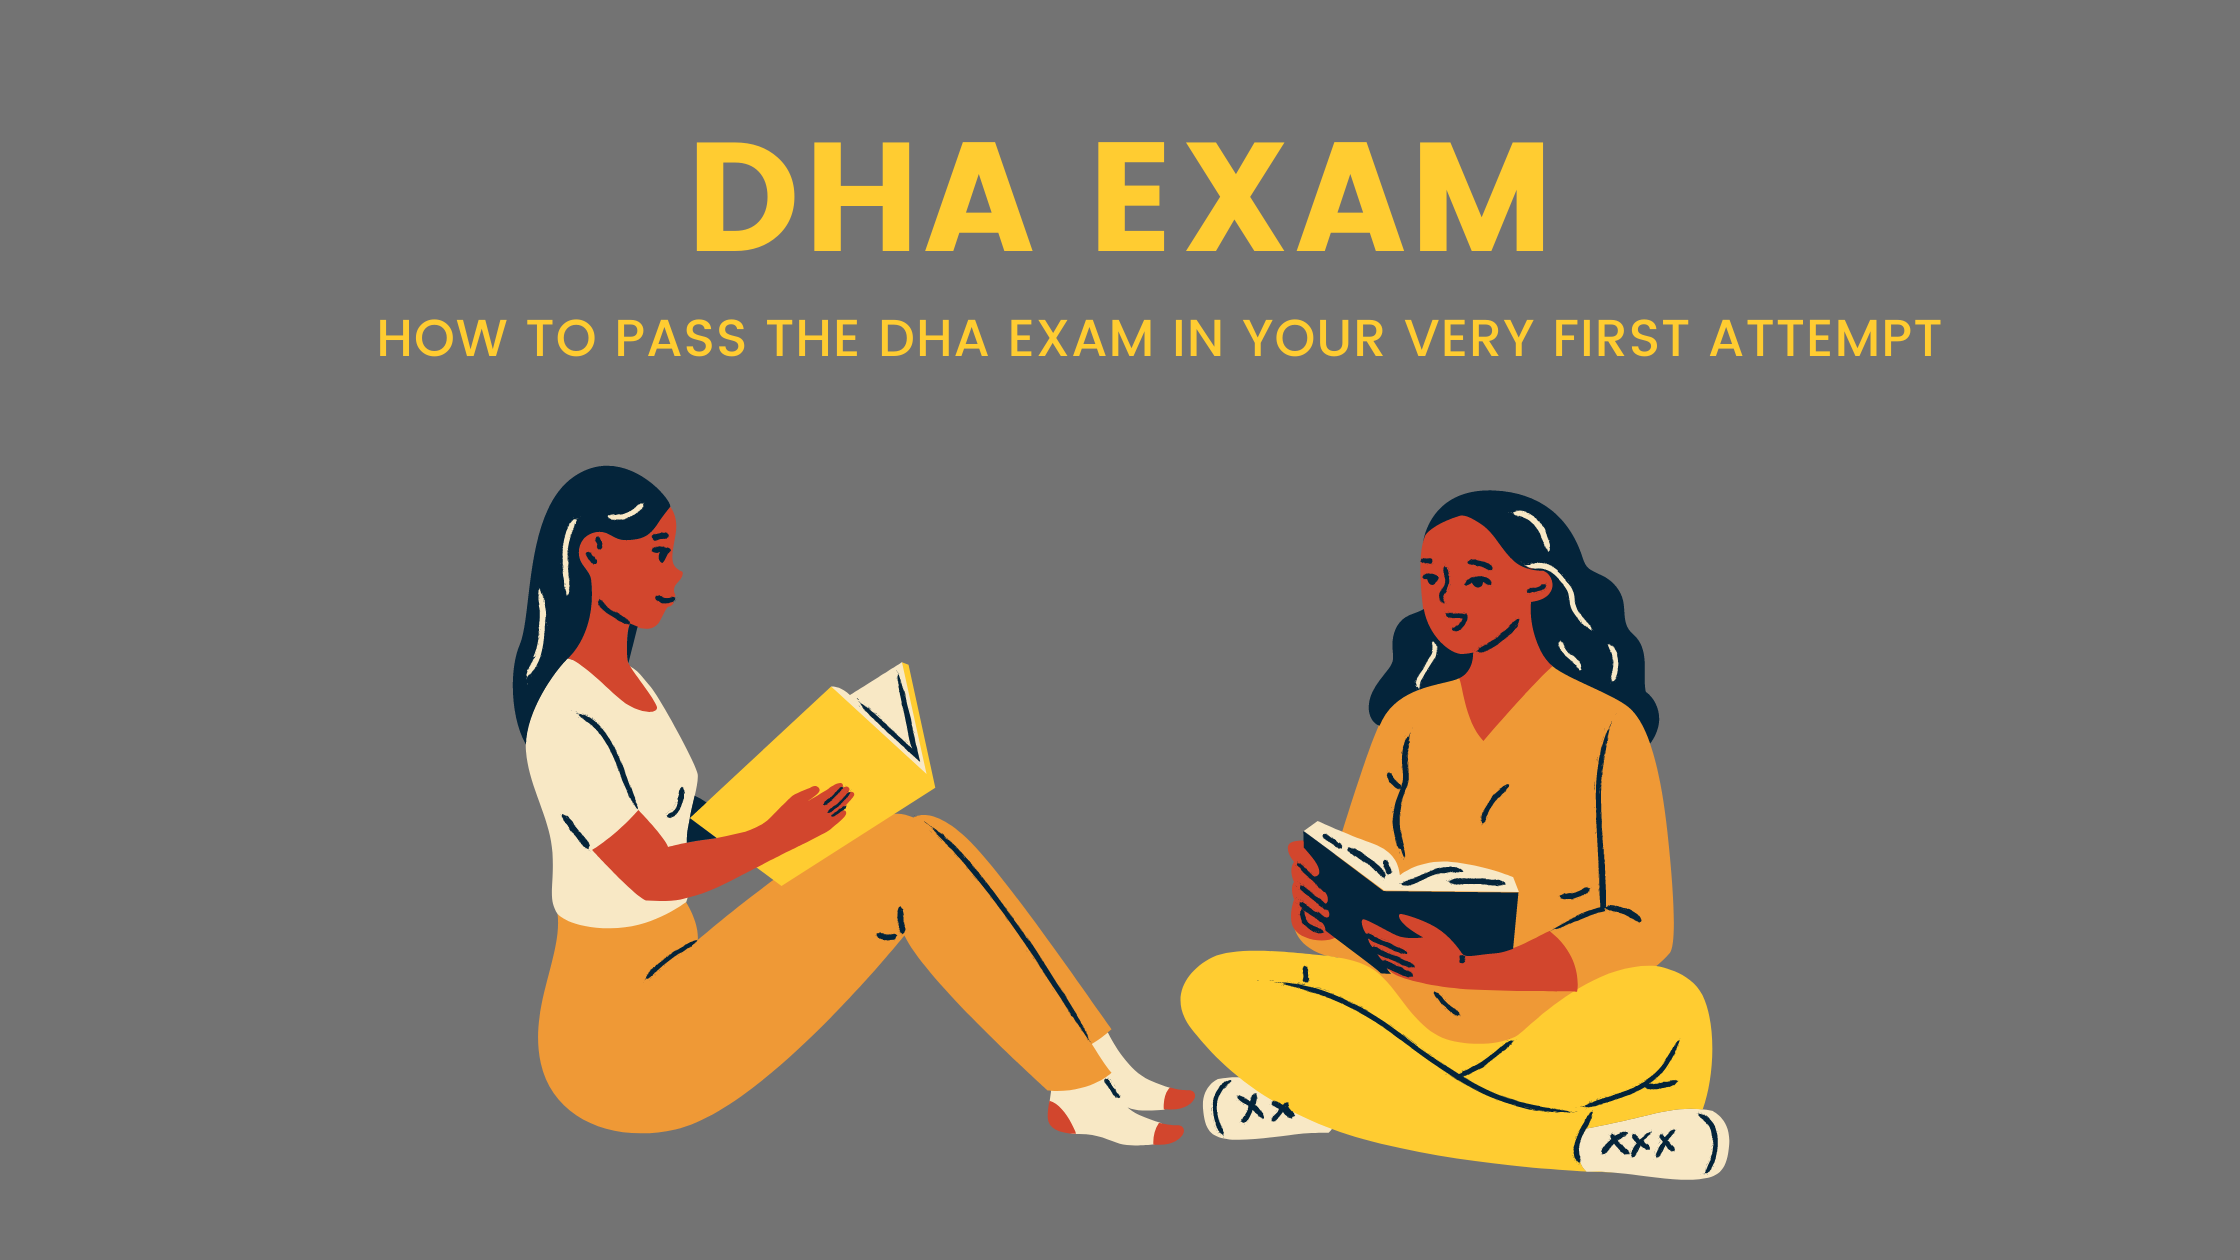 How to pass the DHA exam in your very first attempt